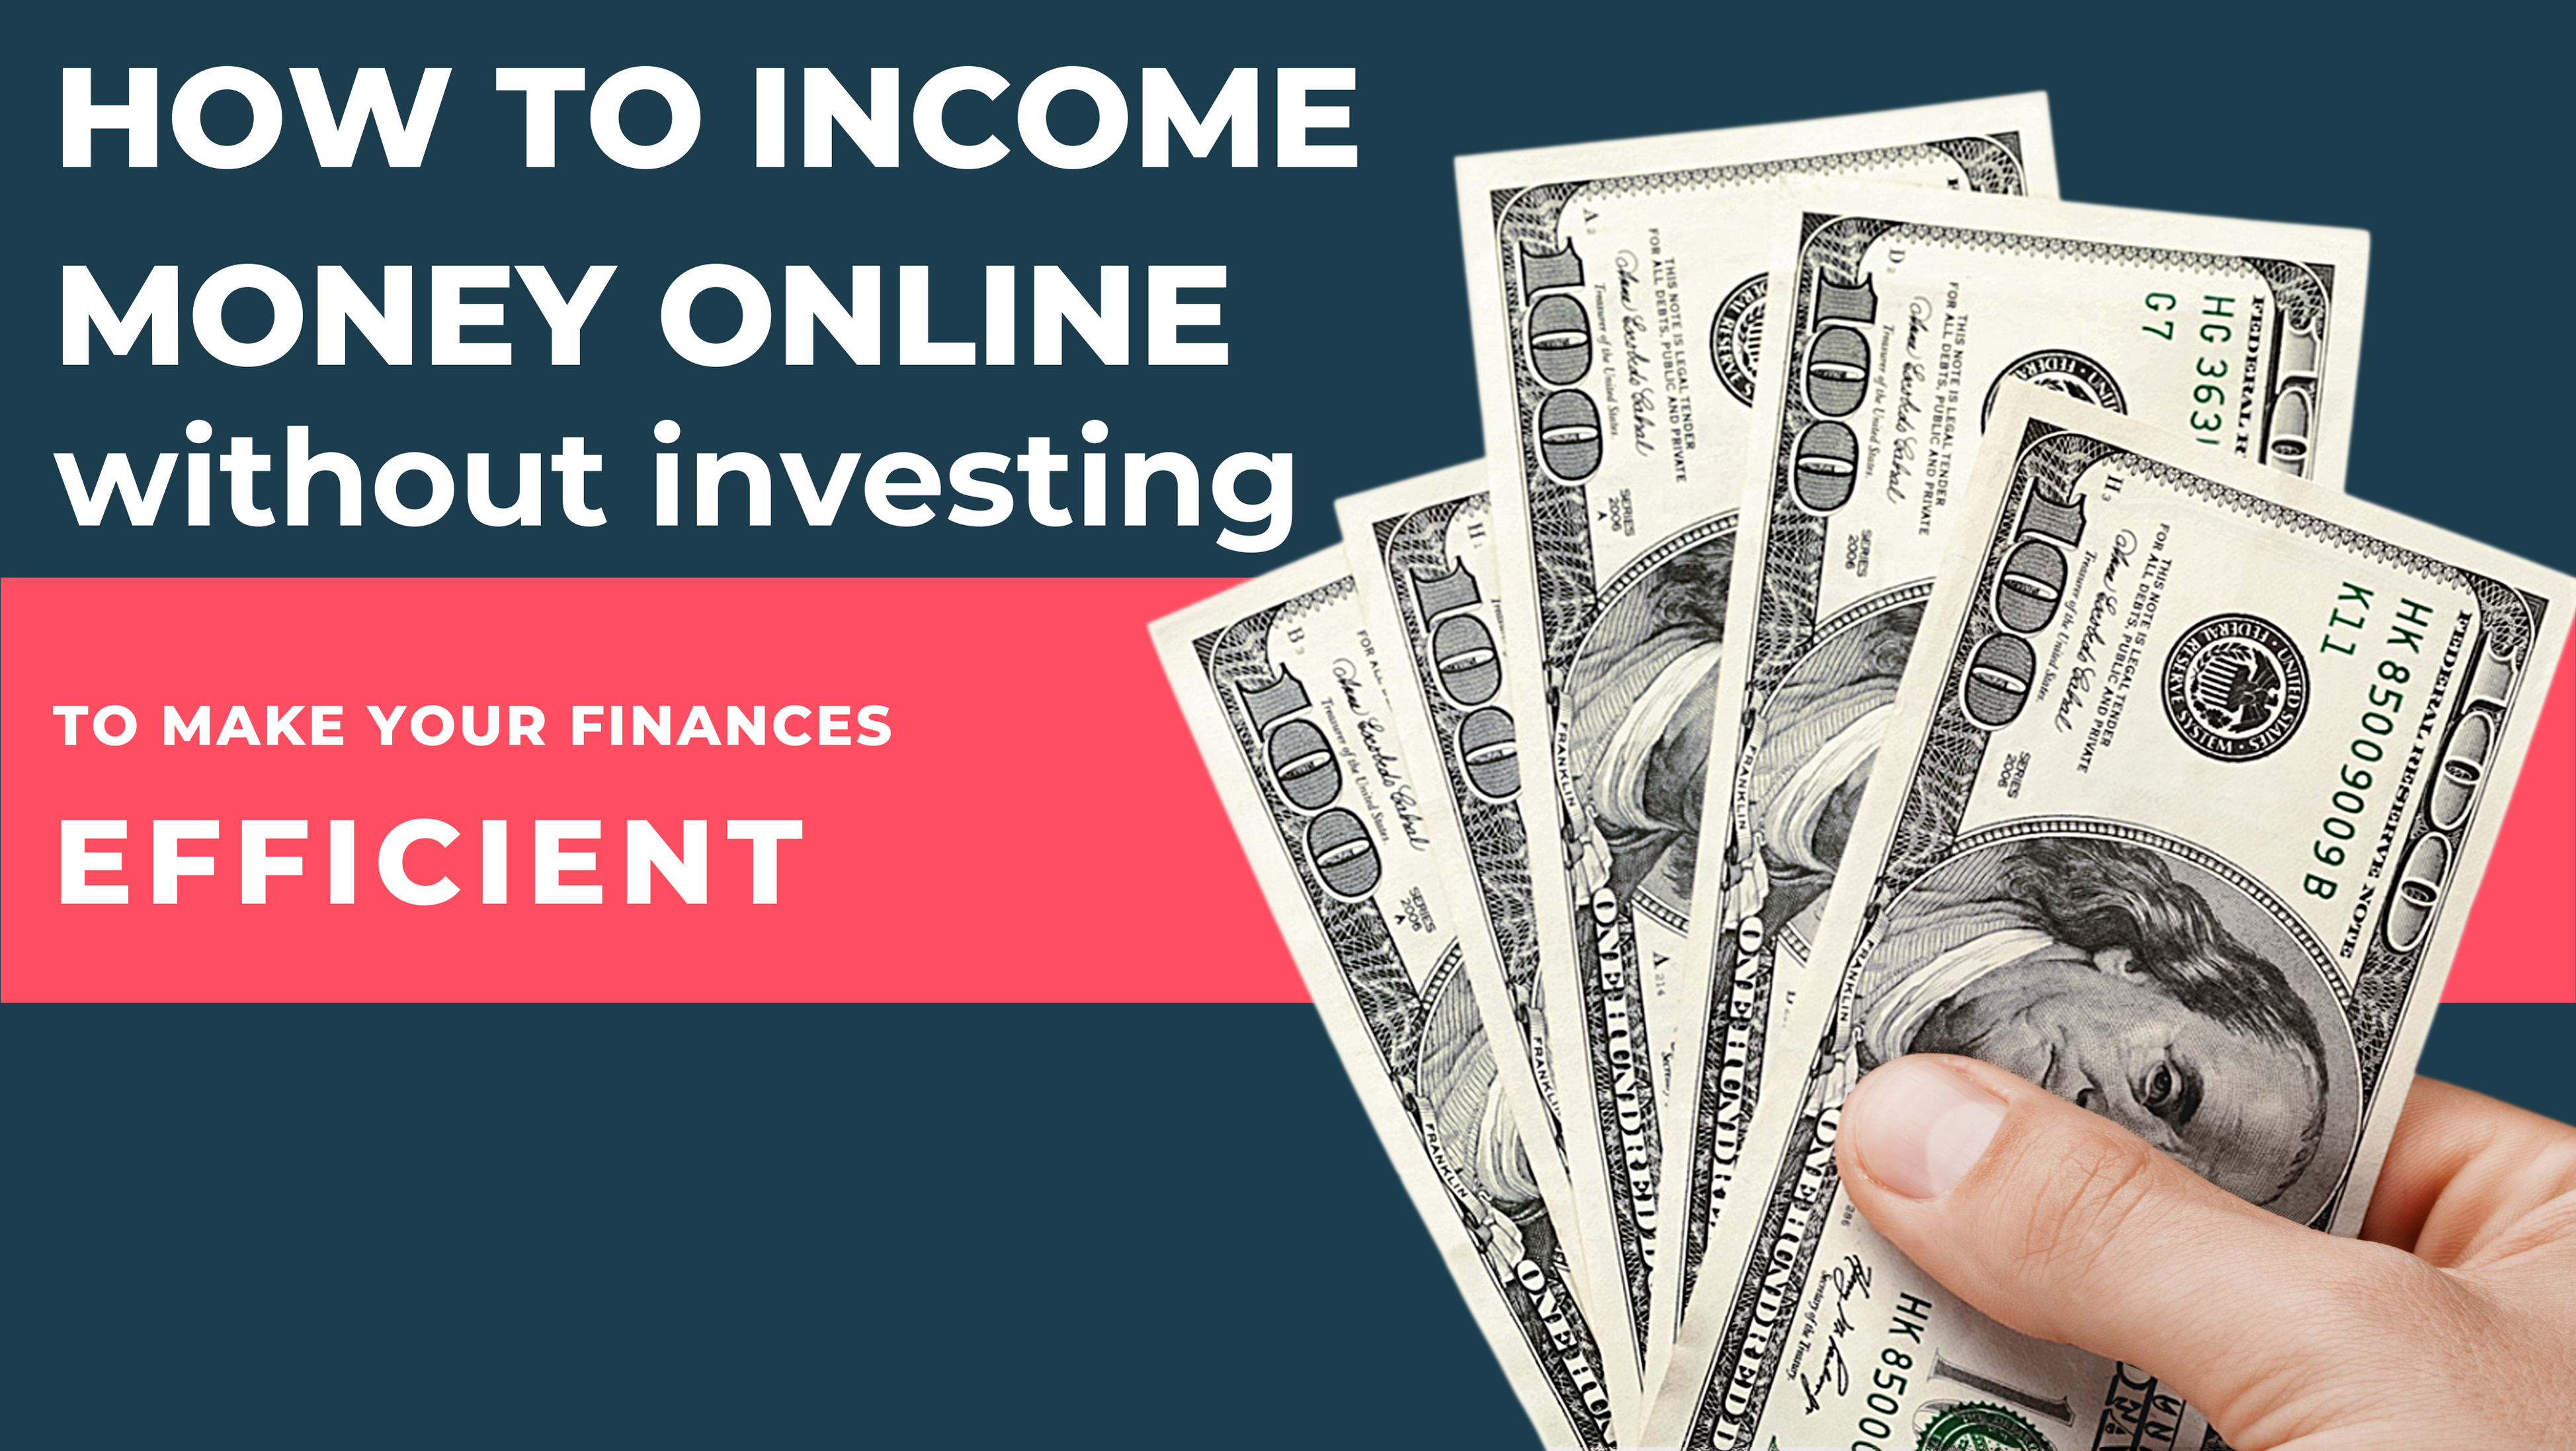 How to Income money online: Top 11 Easy Ways